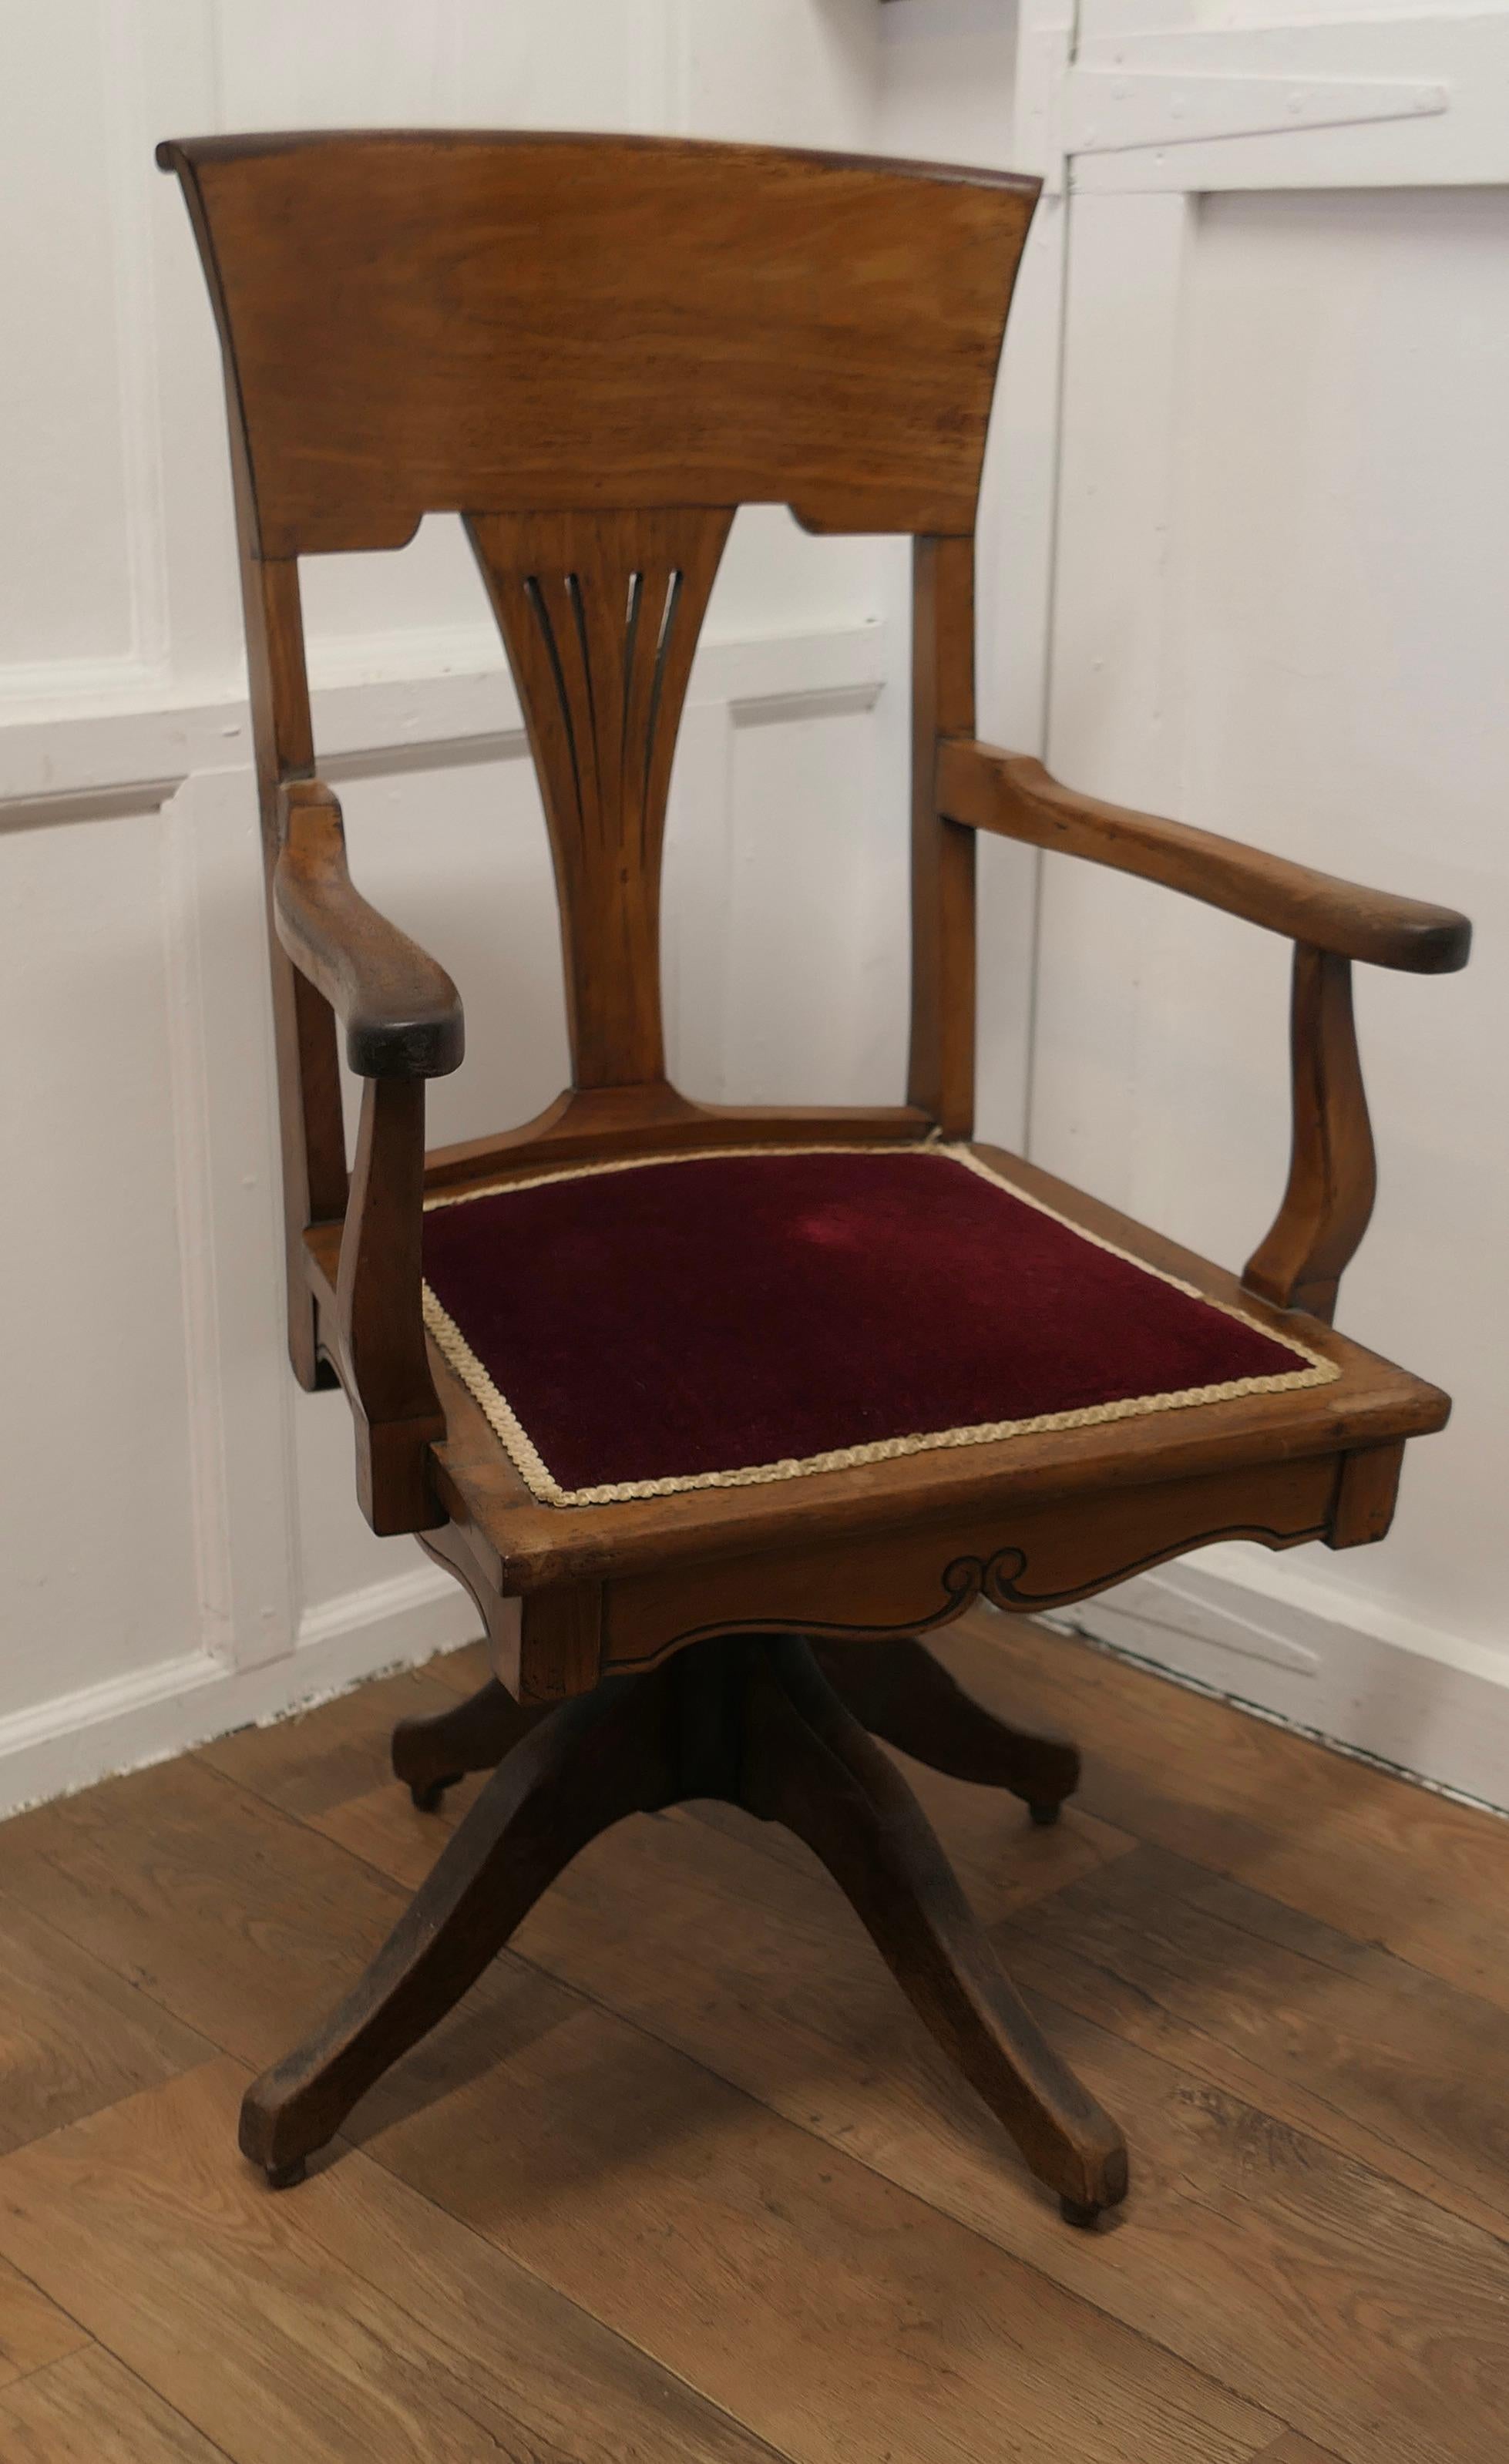 Edwardian Arts and Crafts Walnut Desk or Office Chair  

The Chair has an attractive high curving back with a fan shape pierced splat and a wide curved top rail, the seat is upholstered with old Wine coloured velvet
This Stylish chair swivels easily